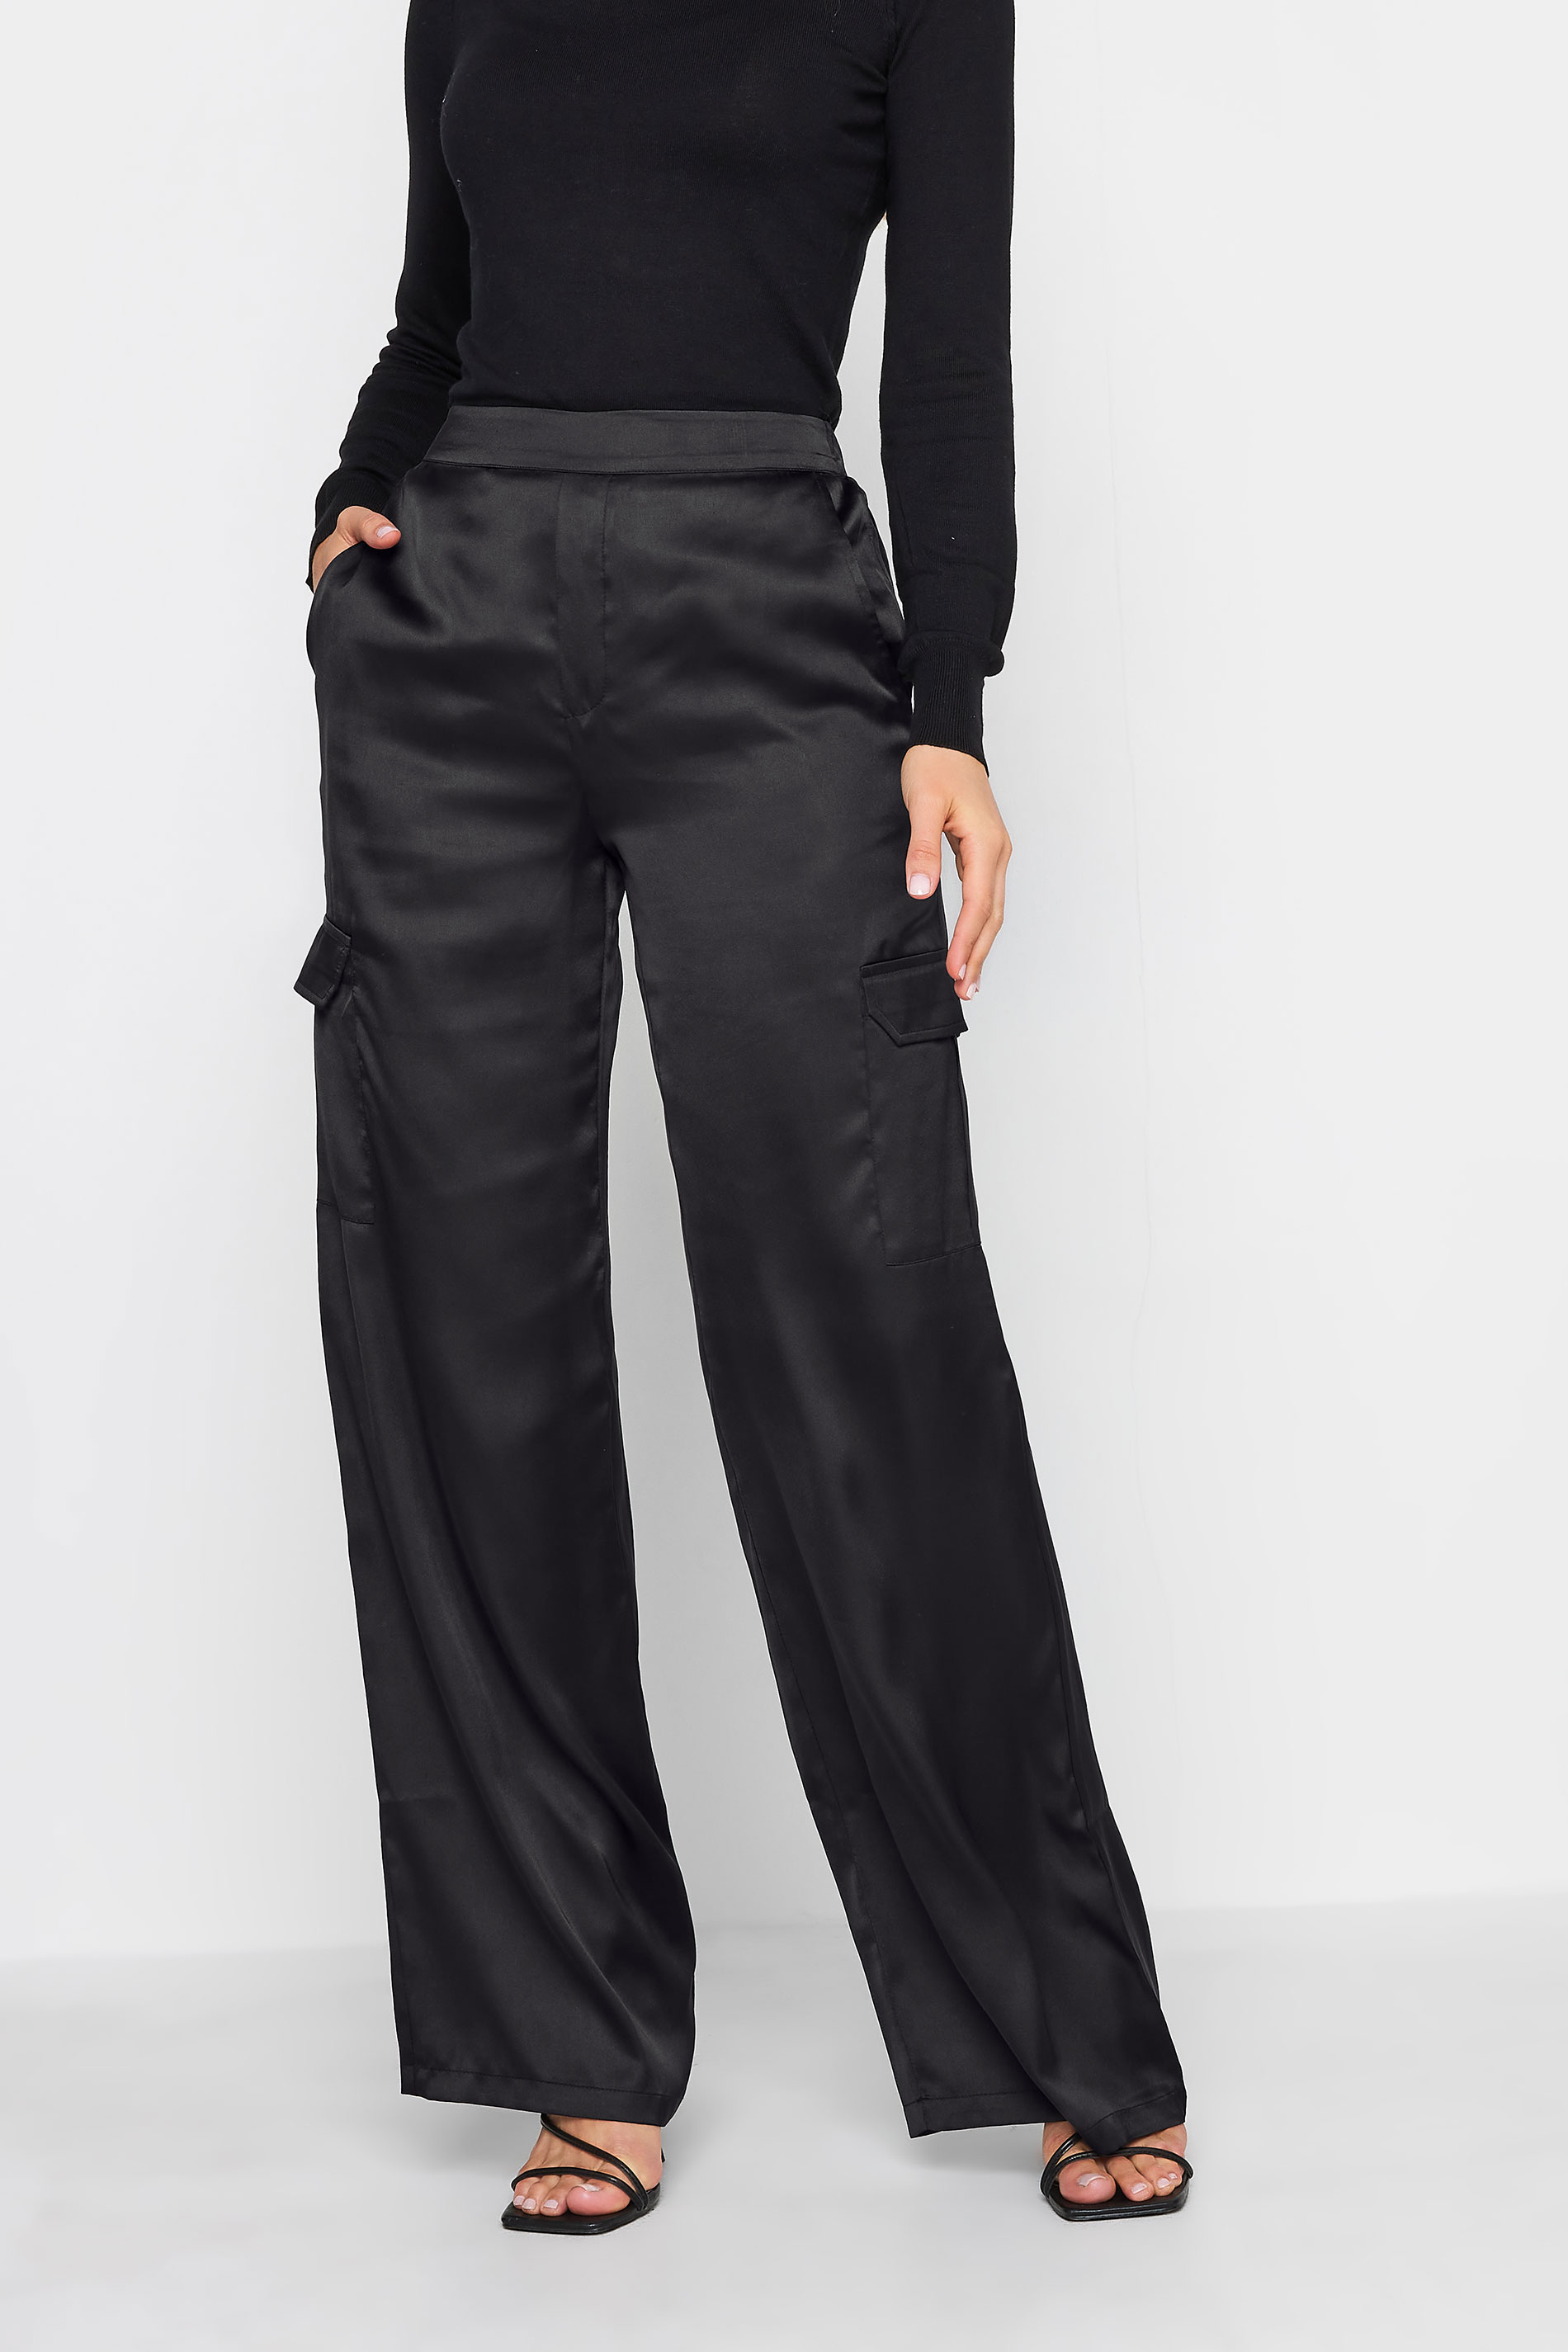 Only For Tonight Black Satin Wide-Leg Trouser Pants | Clothes, Womens  business attire, Wide leg trouser